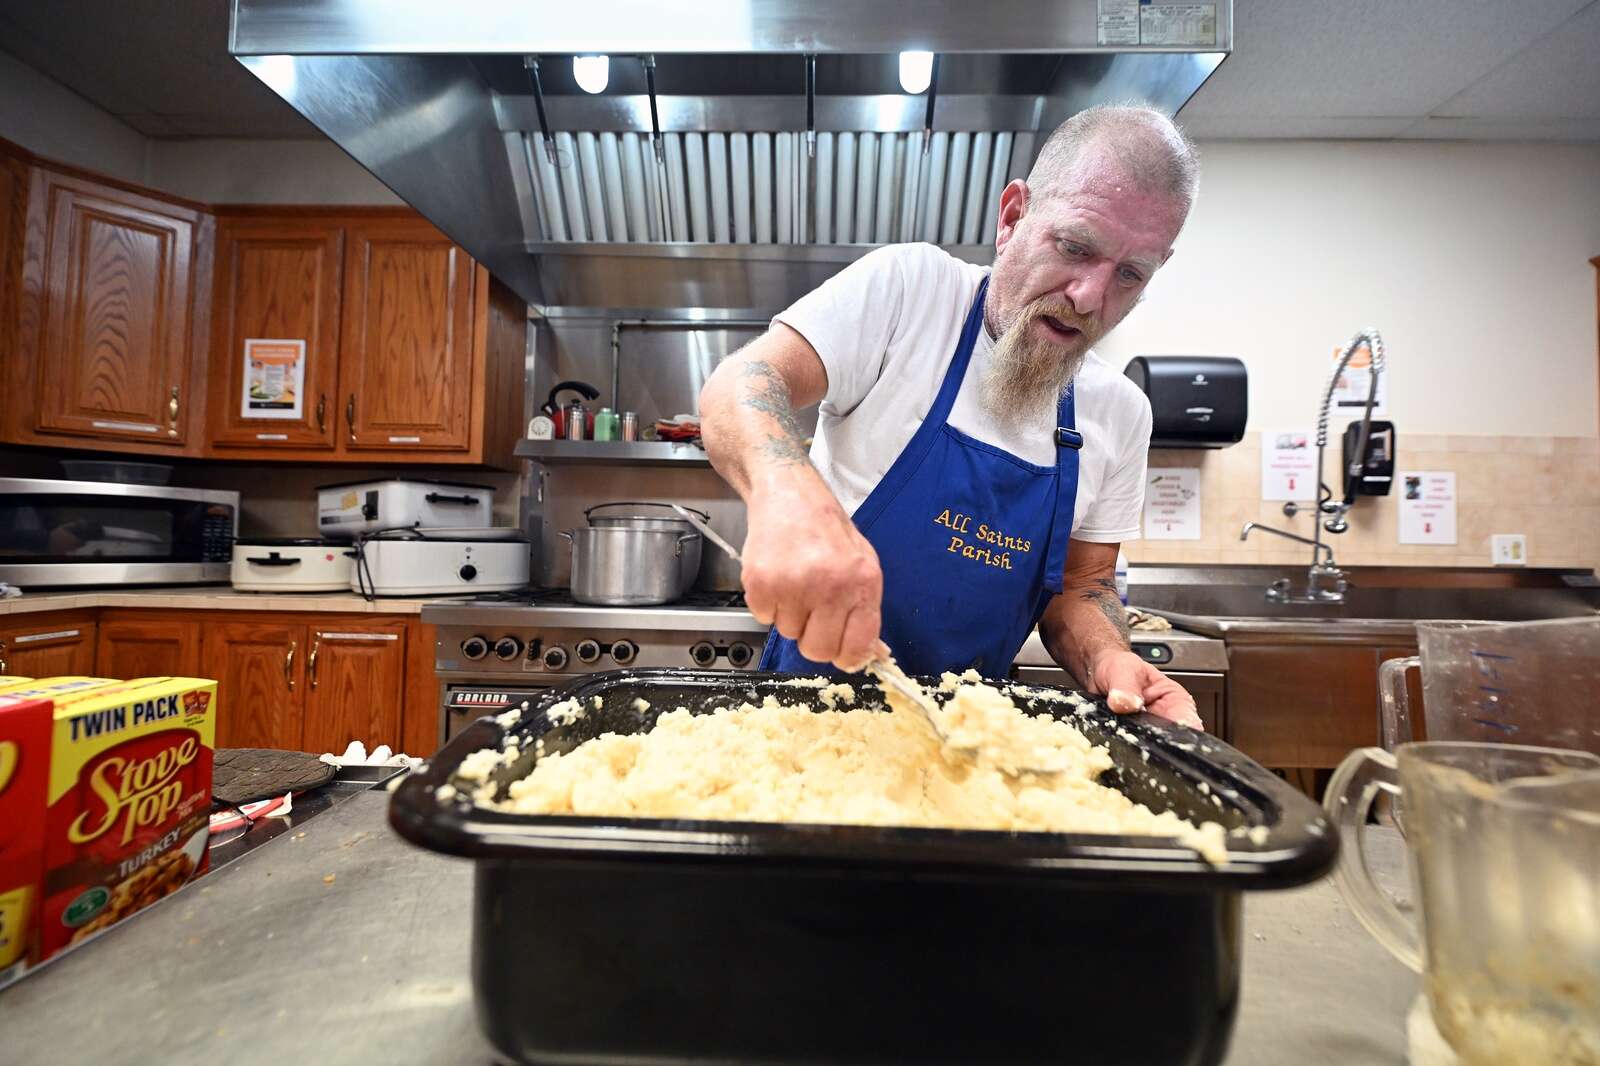 Volunteer preps food at the Thanksgiving Community Meal at St. Peter Roman Catholic Church